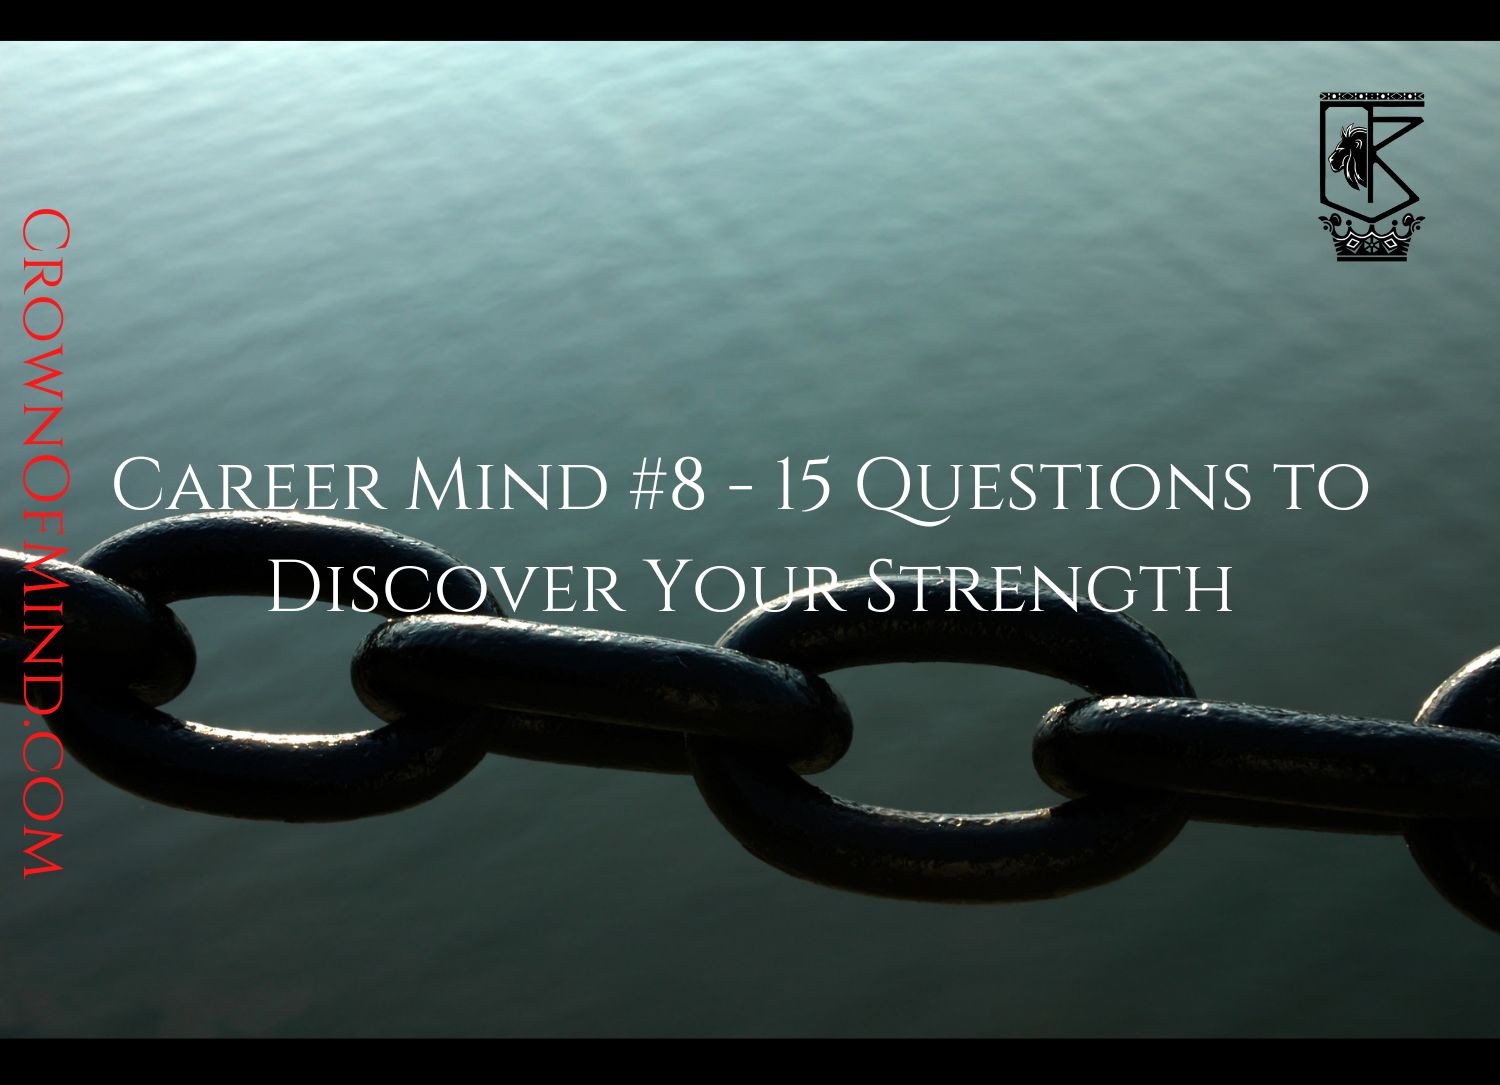 Career Mind #8 – 15 Questions to Discover Your Strength